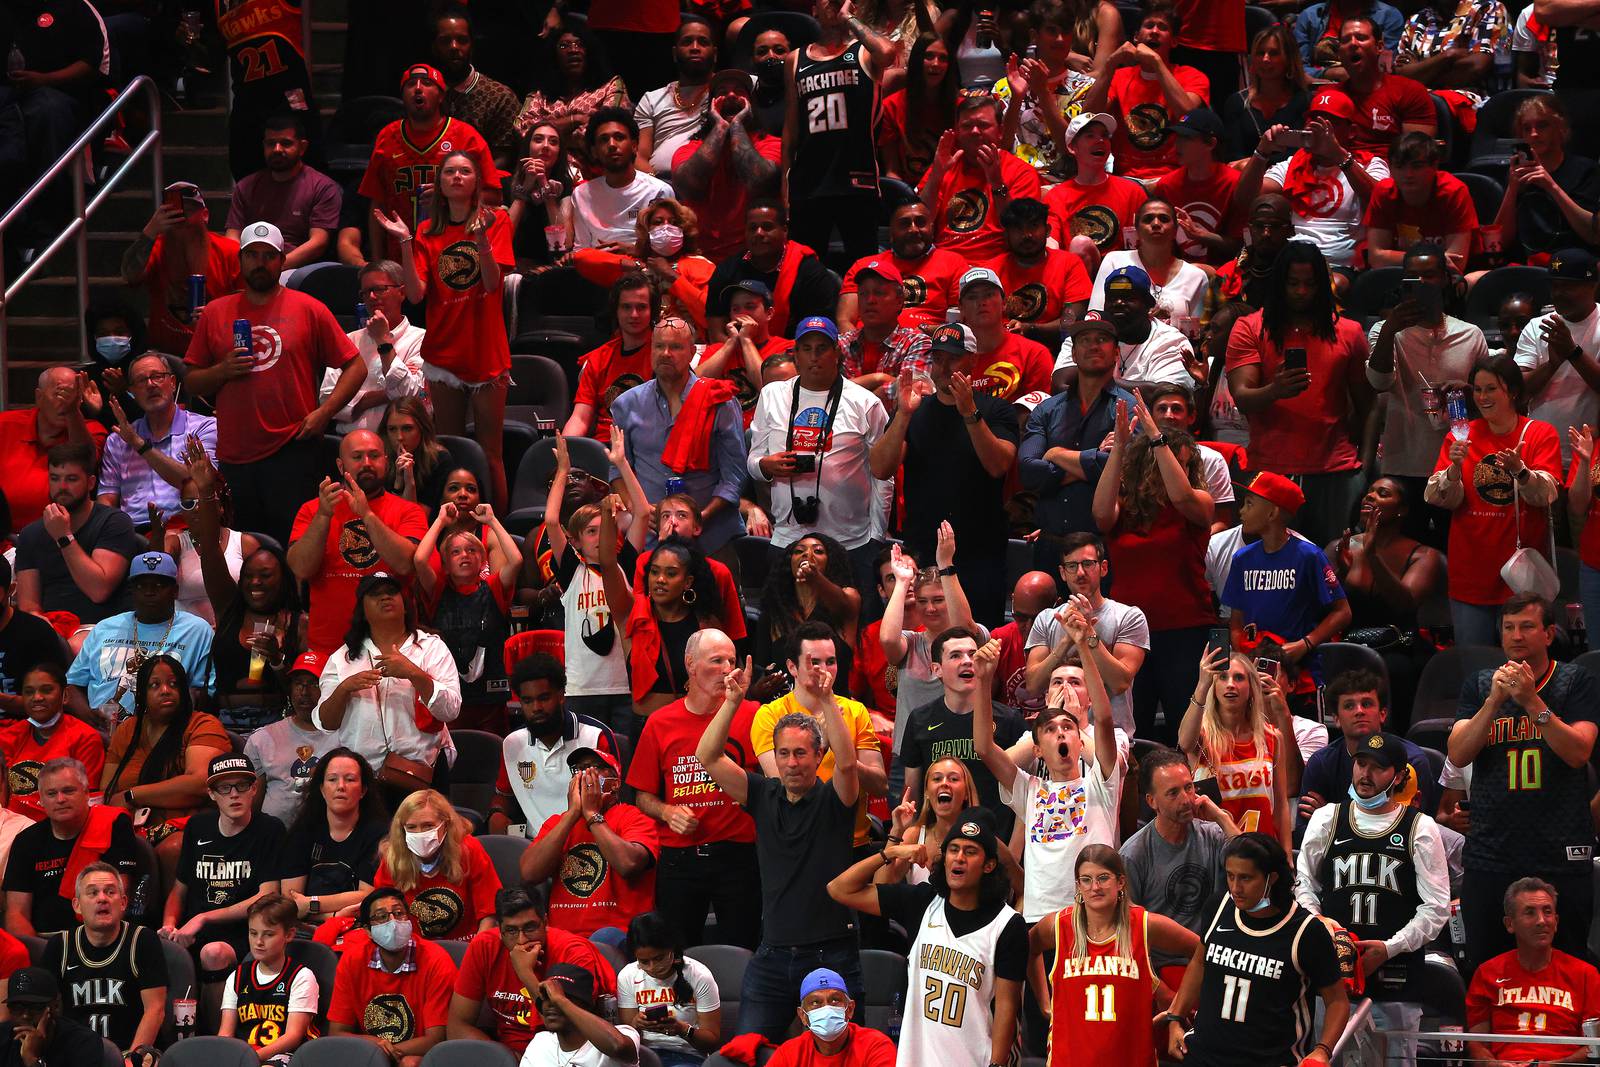 Fans and businesses “Believe” in the Atlanta Hawks playoff run WSBTV